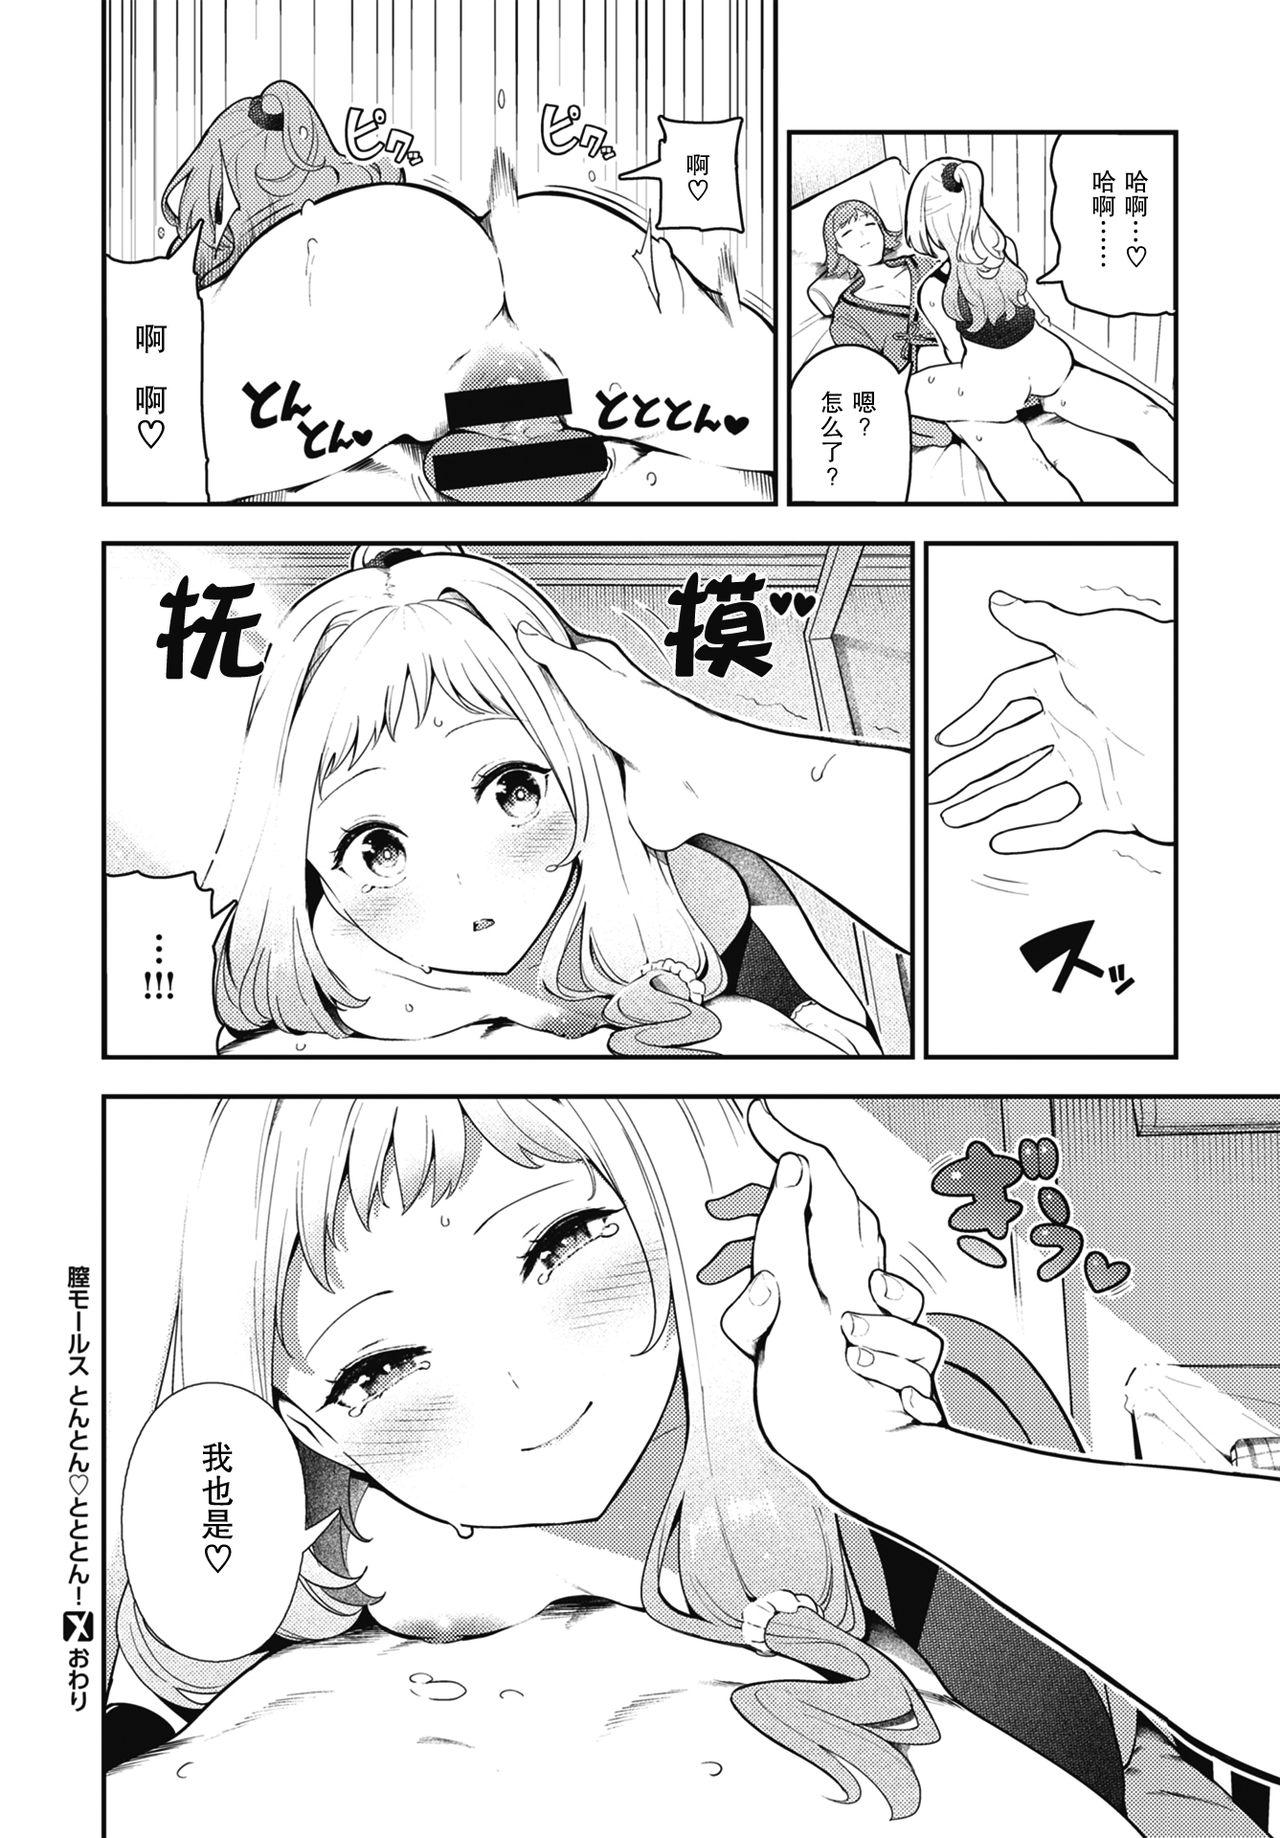 Girl Get Fuck Chitsu Morse TONTON ♡ TOTOTON! | 阴道摩尔斯咚咚♡咚咚咚！ Picked Up - Page 19